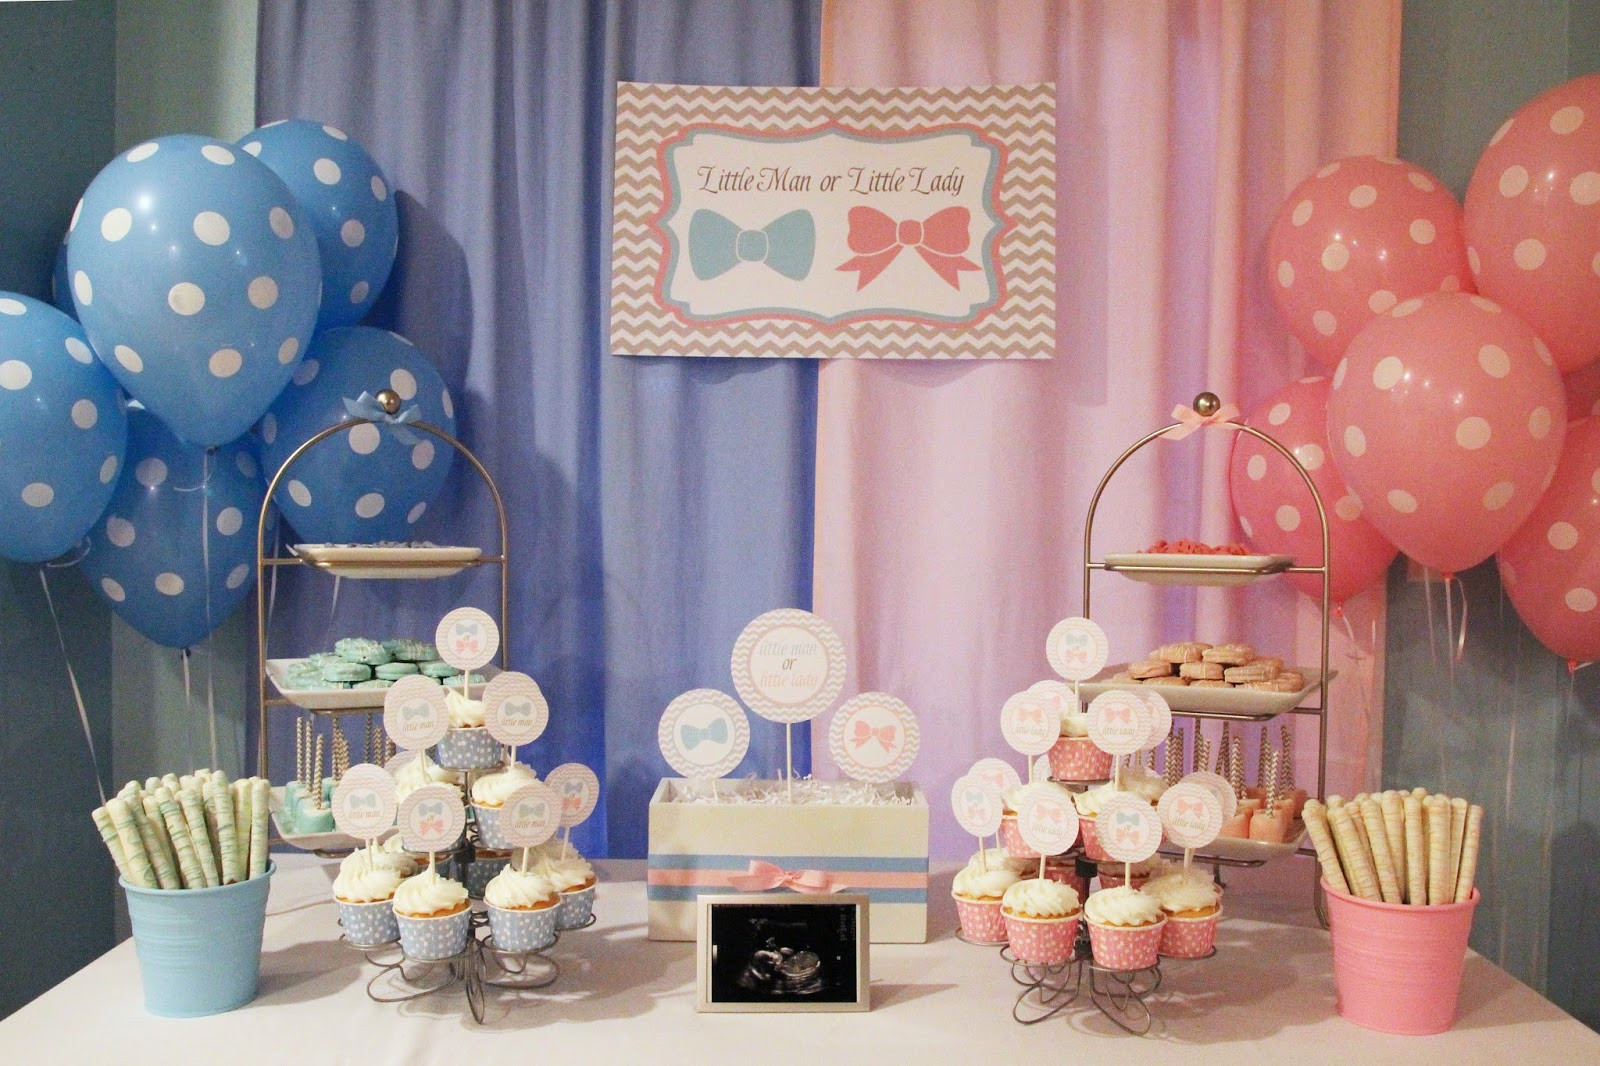 Great Gender Reveal Party Ideas
 5M Creations Gender Reveal Party Little Man or Little Lady